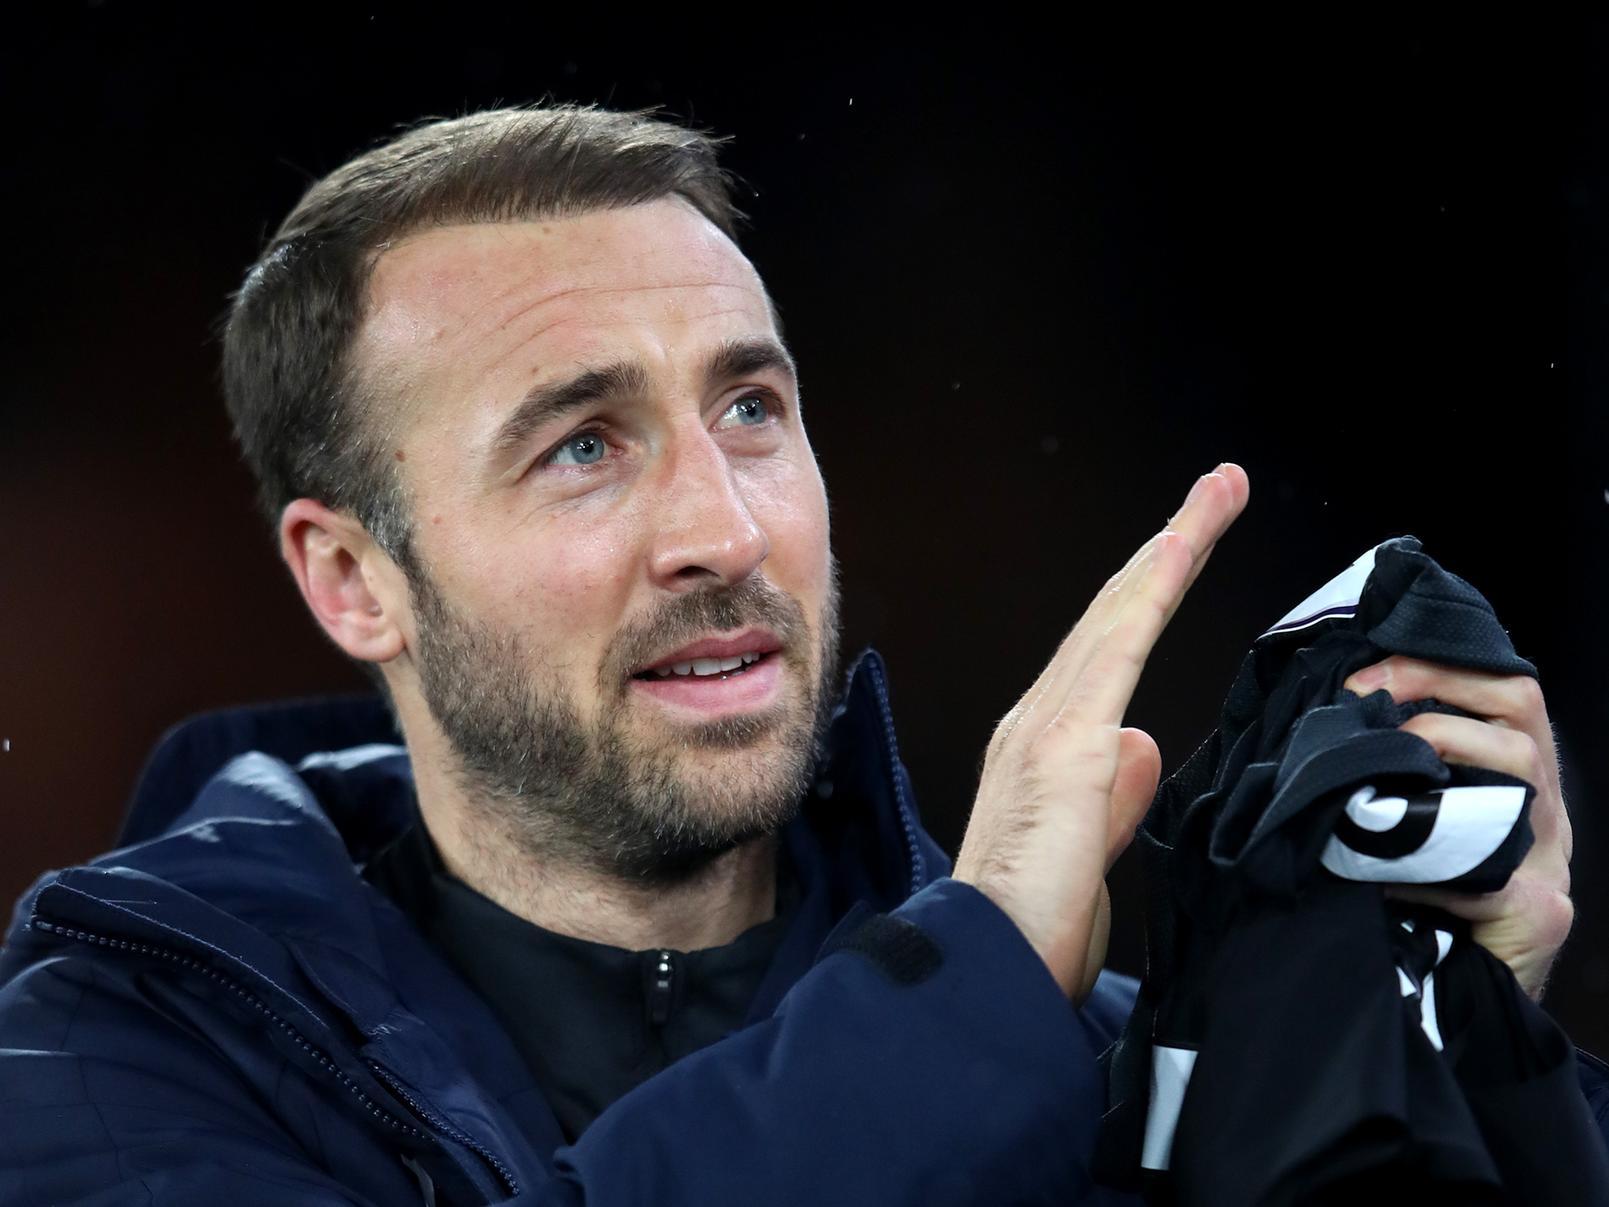 Nottingham Forest are said to be looking to escalate their attempts to sign veteran striker Glenn Murray from Brighton, as they look to consolidate their push for promotion. (Daily Telegraph)